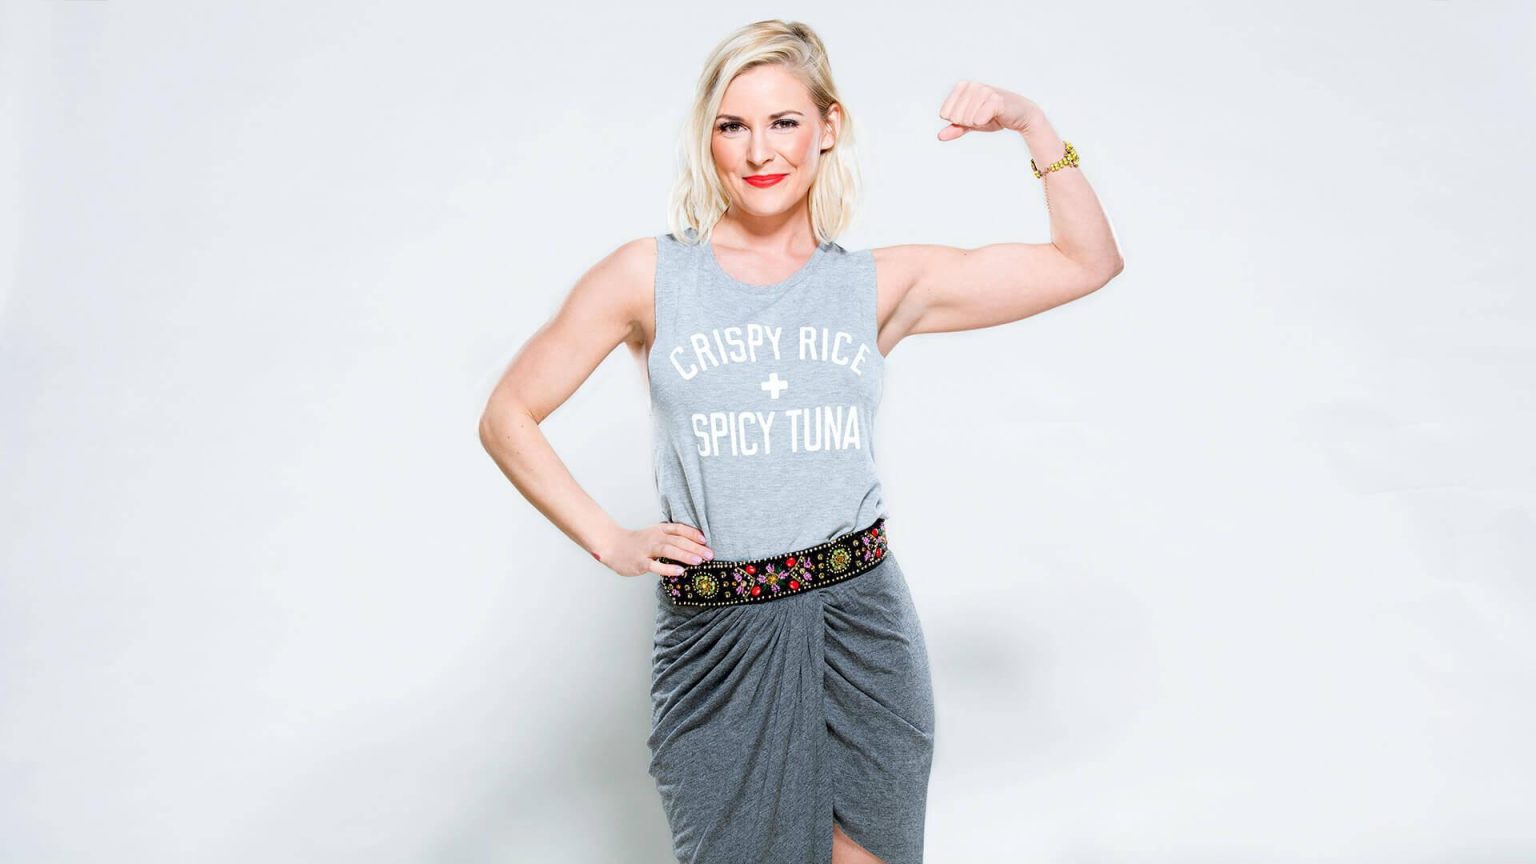 49 Renee Young Nude Pictures Present Her Polarizing Appeal 9